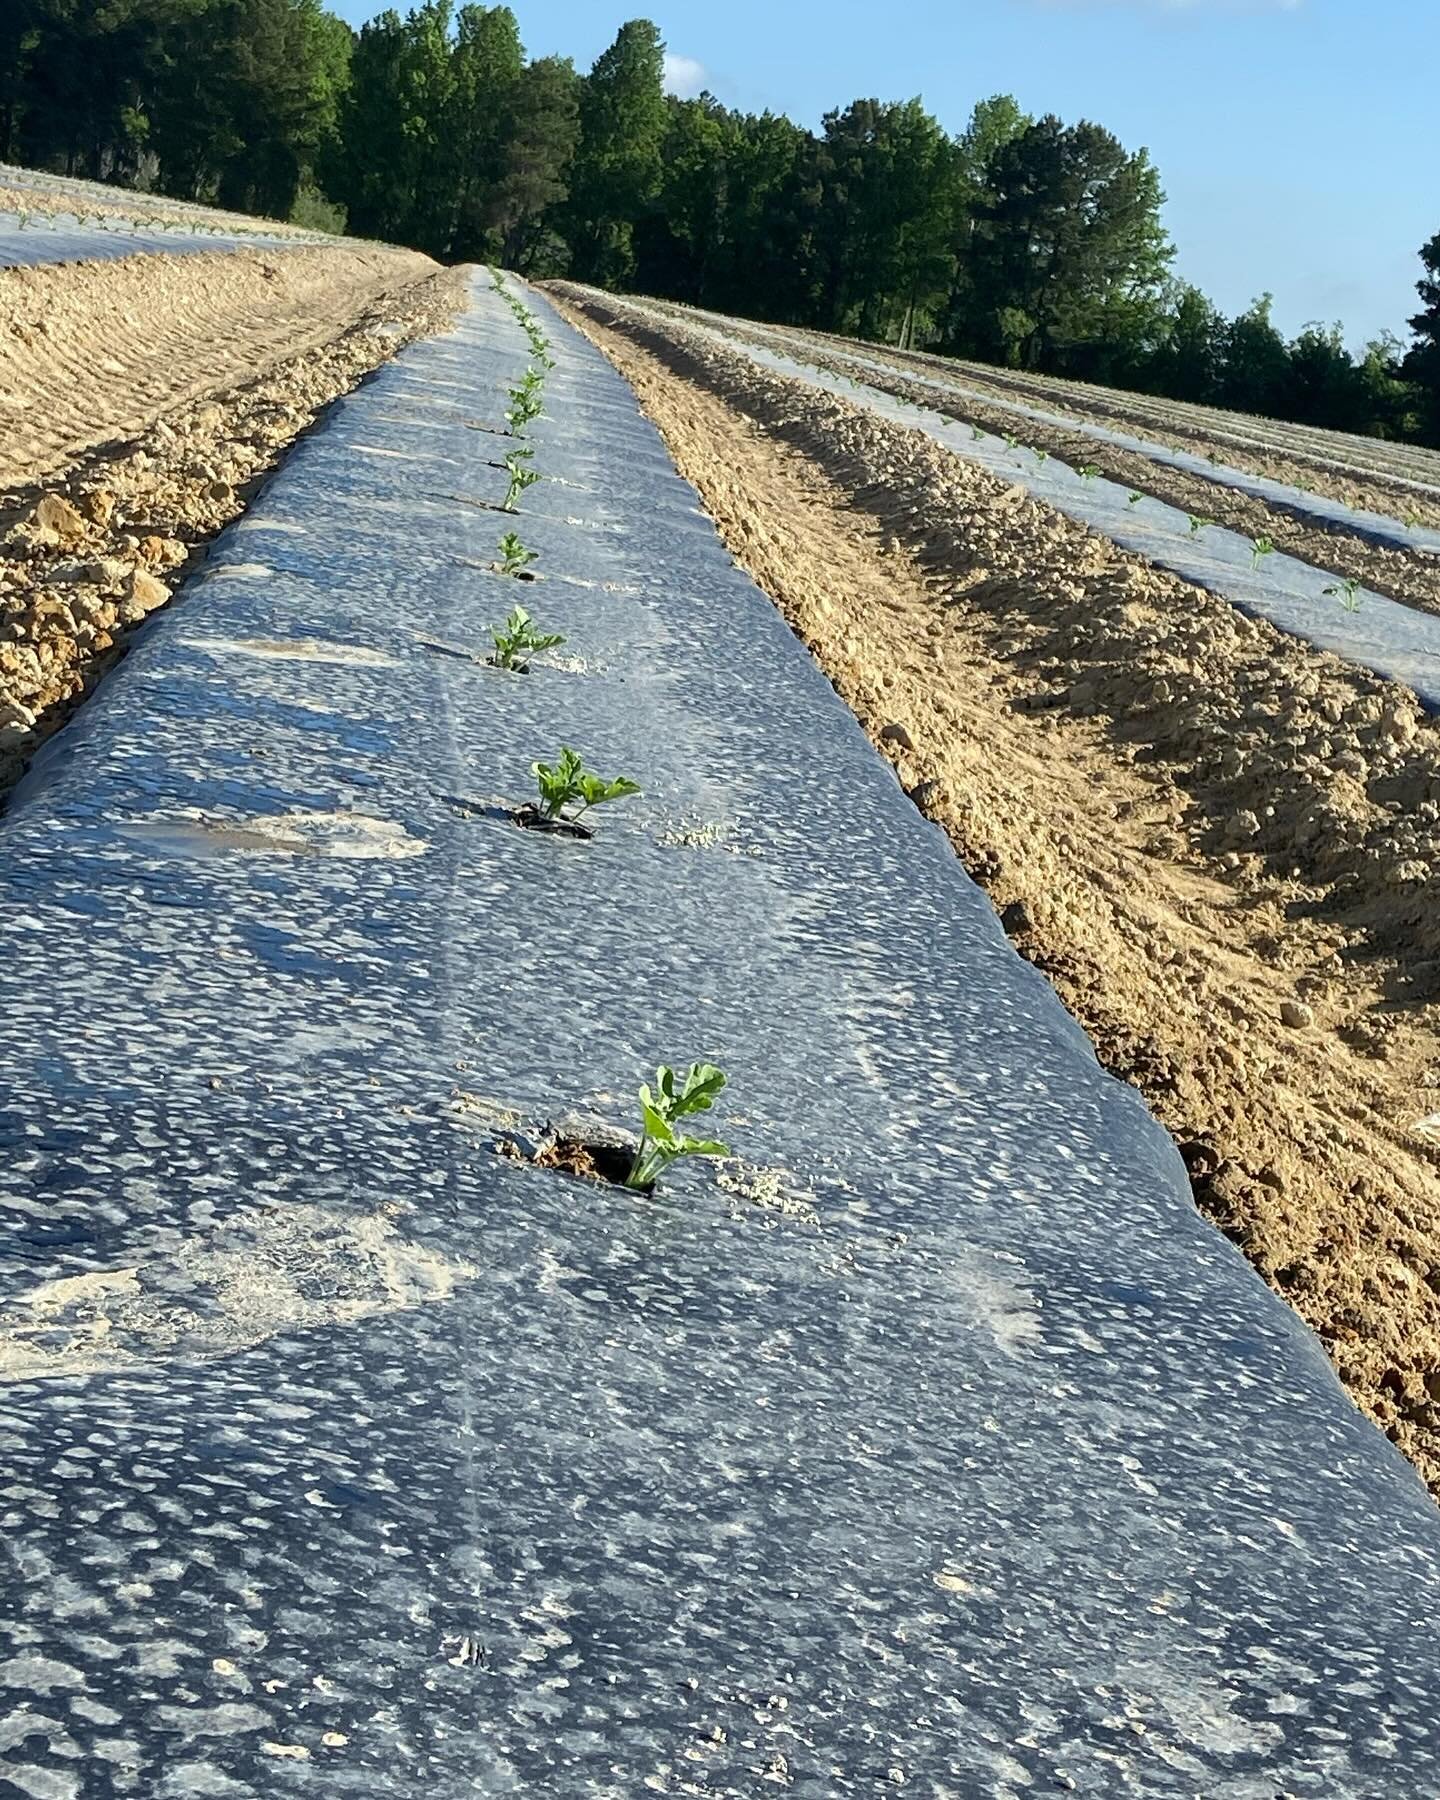 April showers bring May transplanting&hellip;that&rsquo;s how the saying goes, right?

Watermelons coming soon 😍🍉

#watermelons #ncwatermelons #agriculture #farming #gottobenc #sustainableagriculture